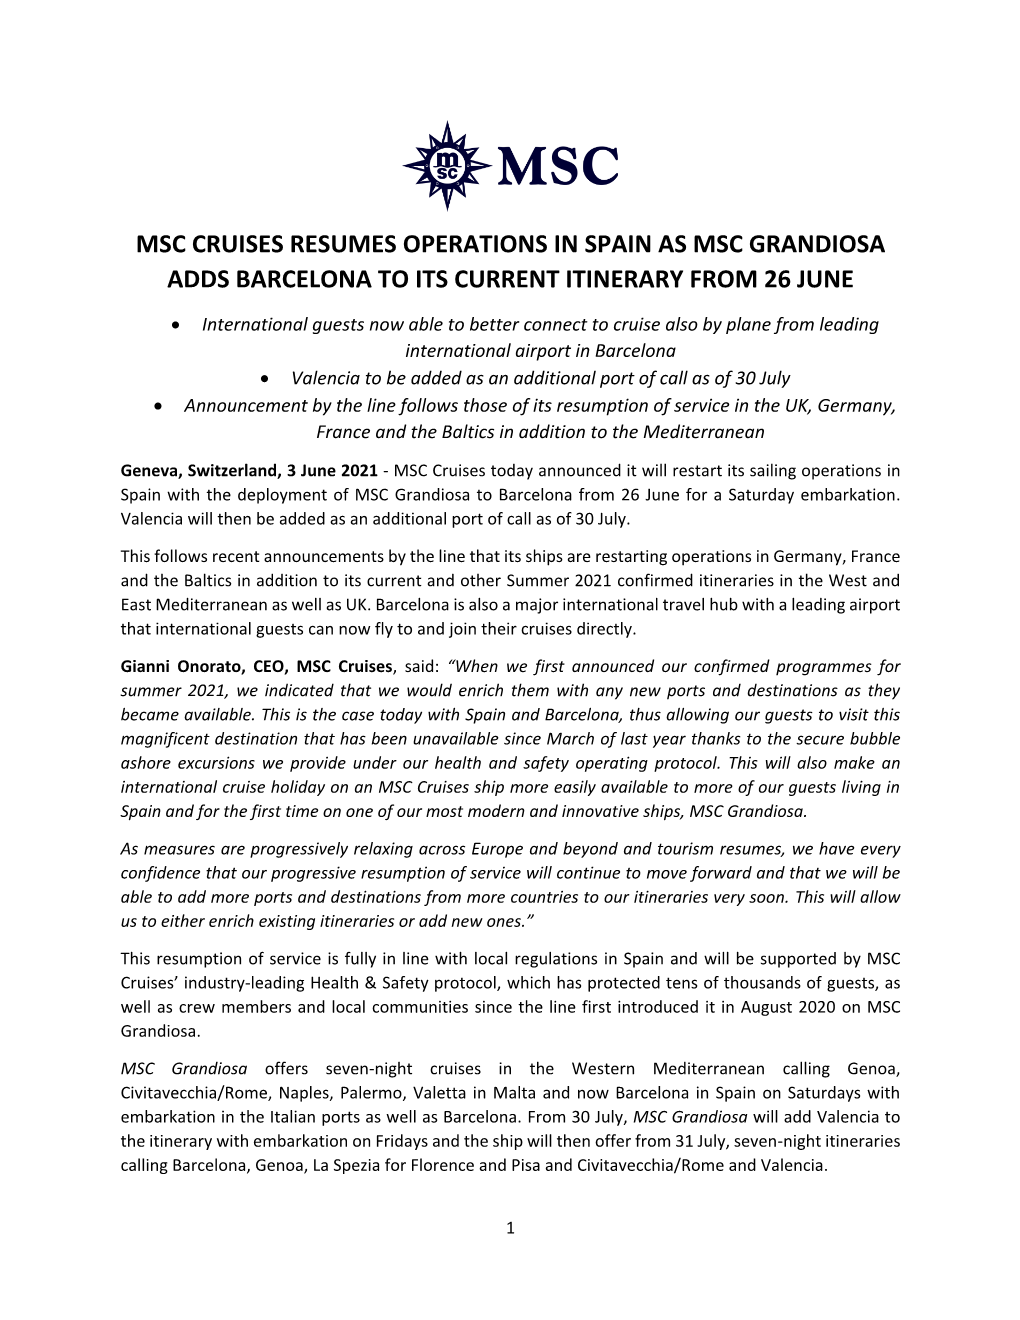 Msc Cruises Resumes Operations in Spain As Msc Grandiosa Adds Barcelona to Its Current Itinerary from 26 June